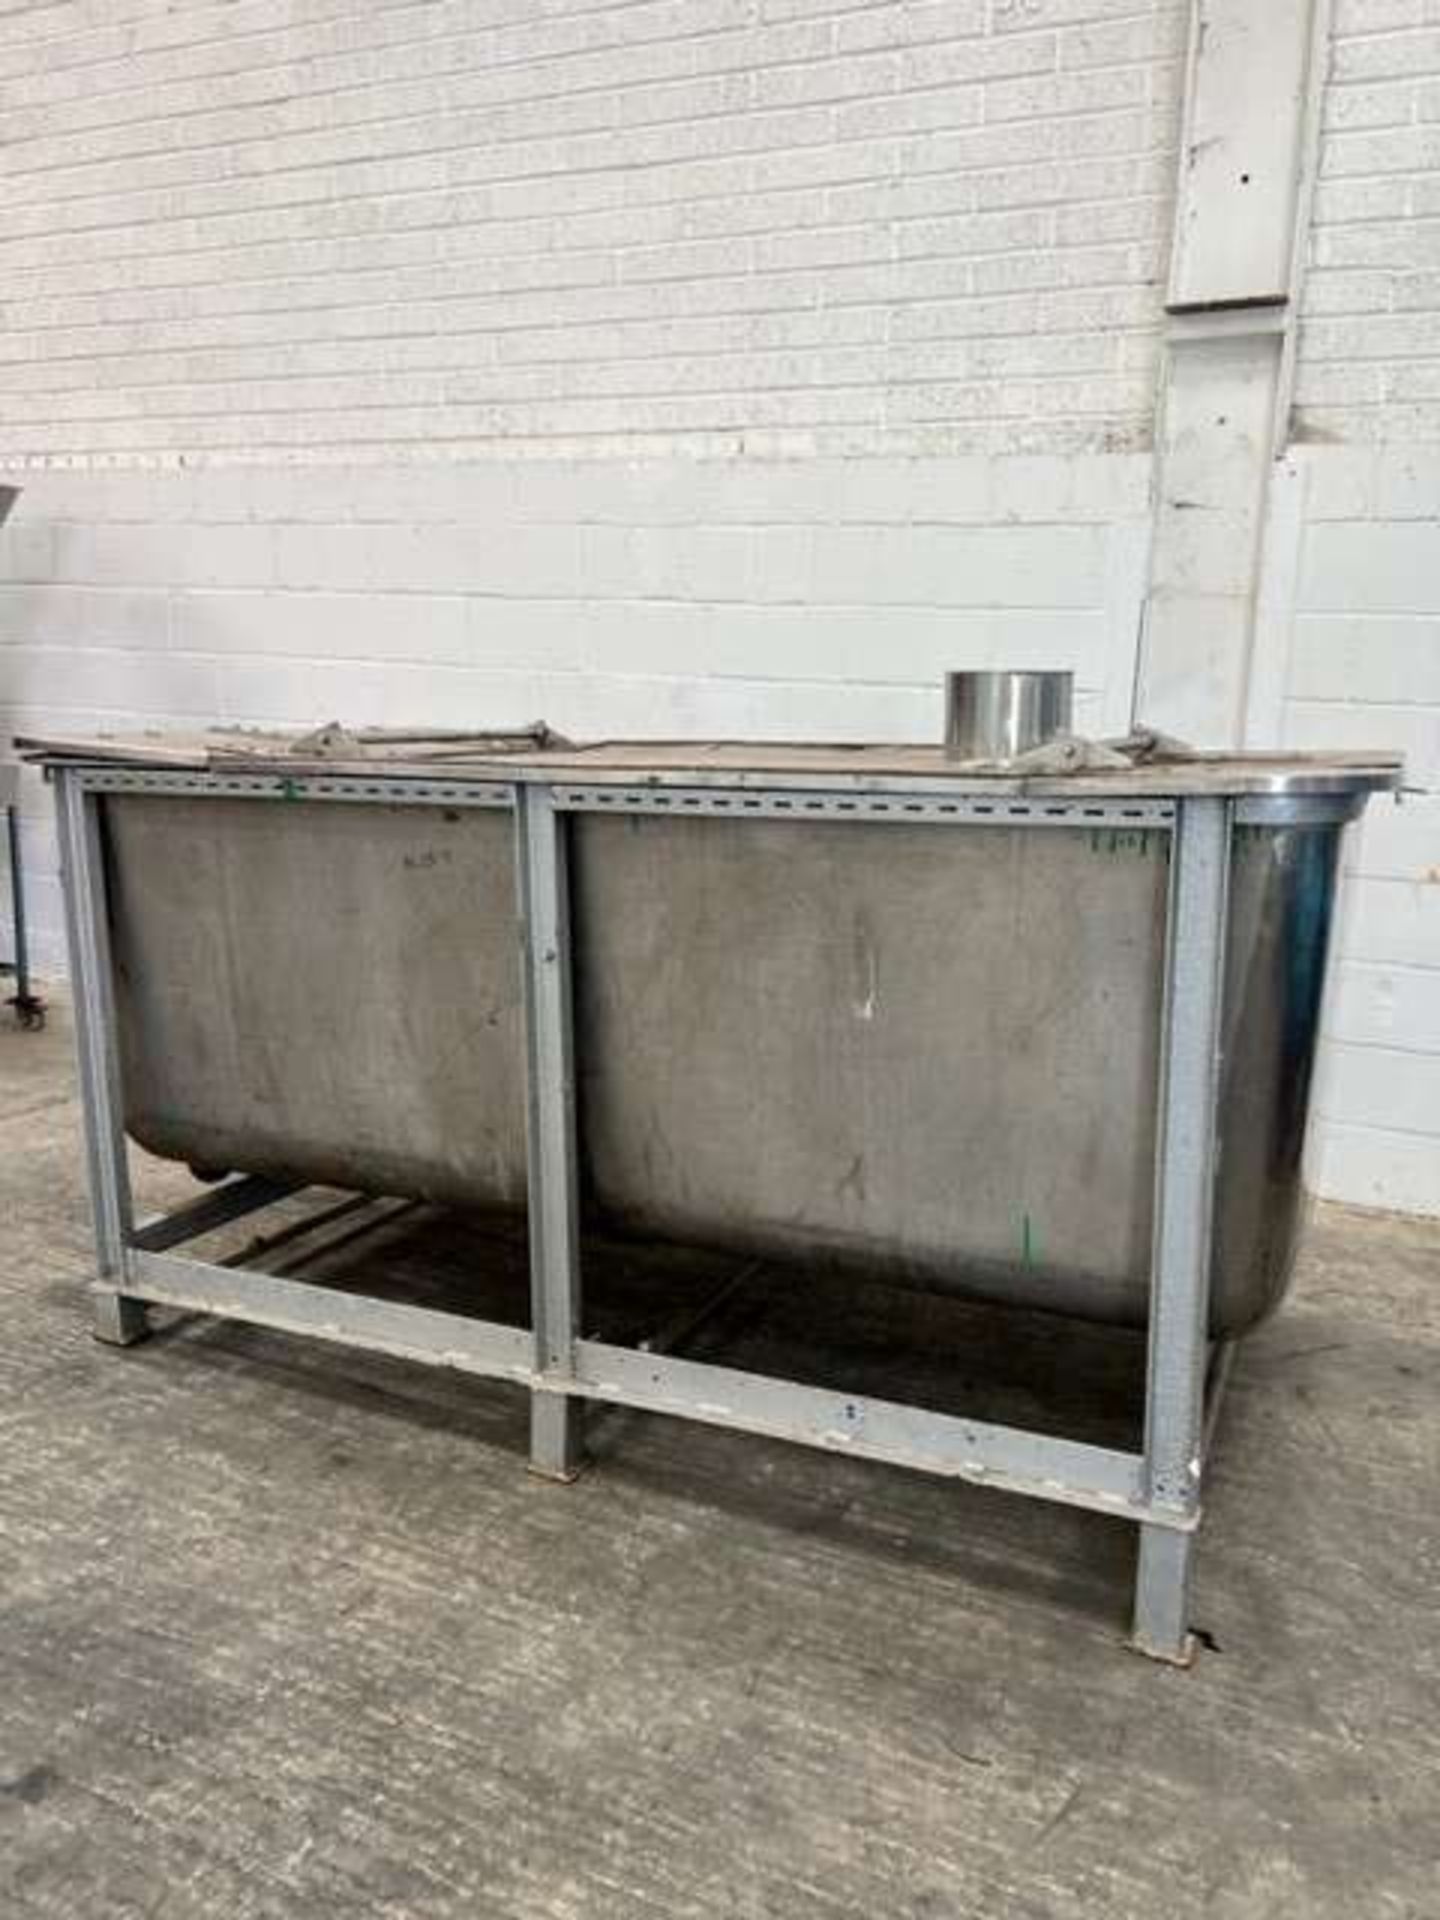 400 Litre Square Product Storage Container - Image 2 of 3